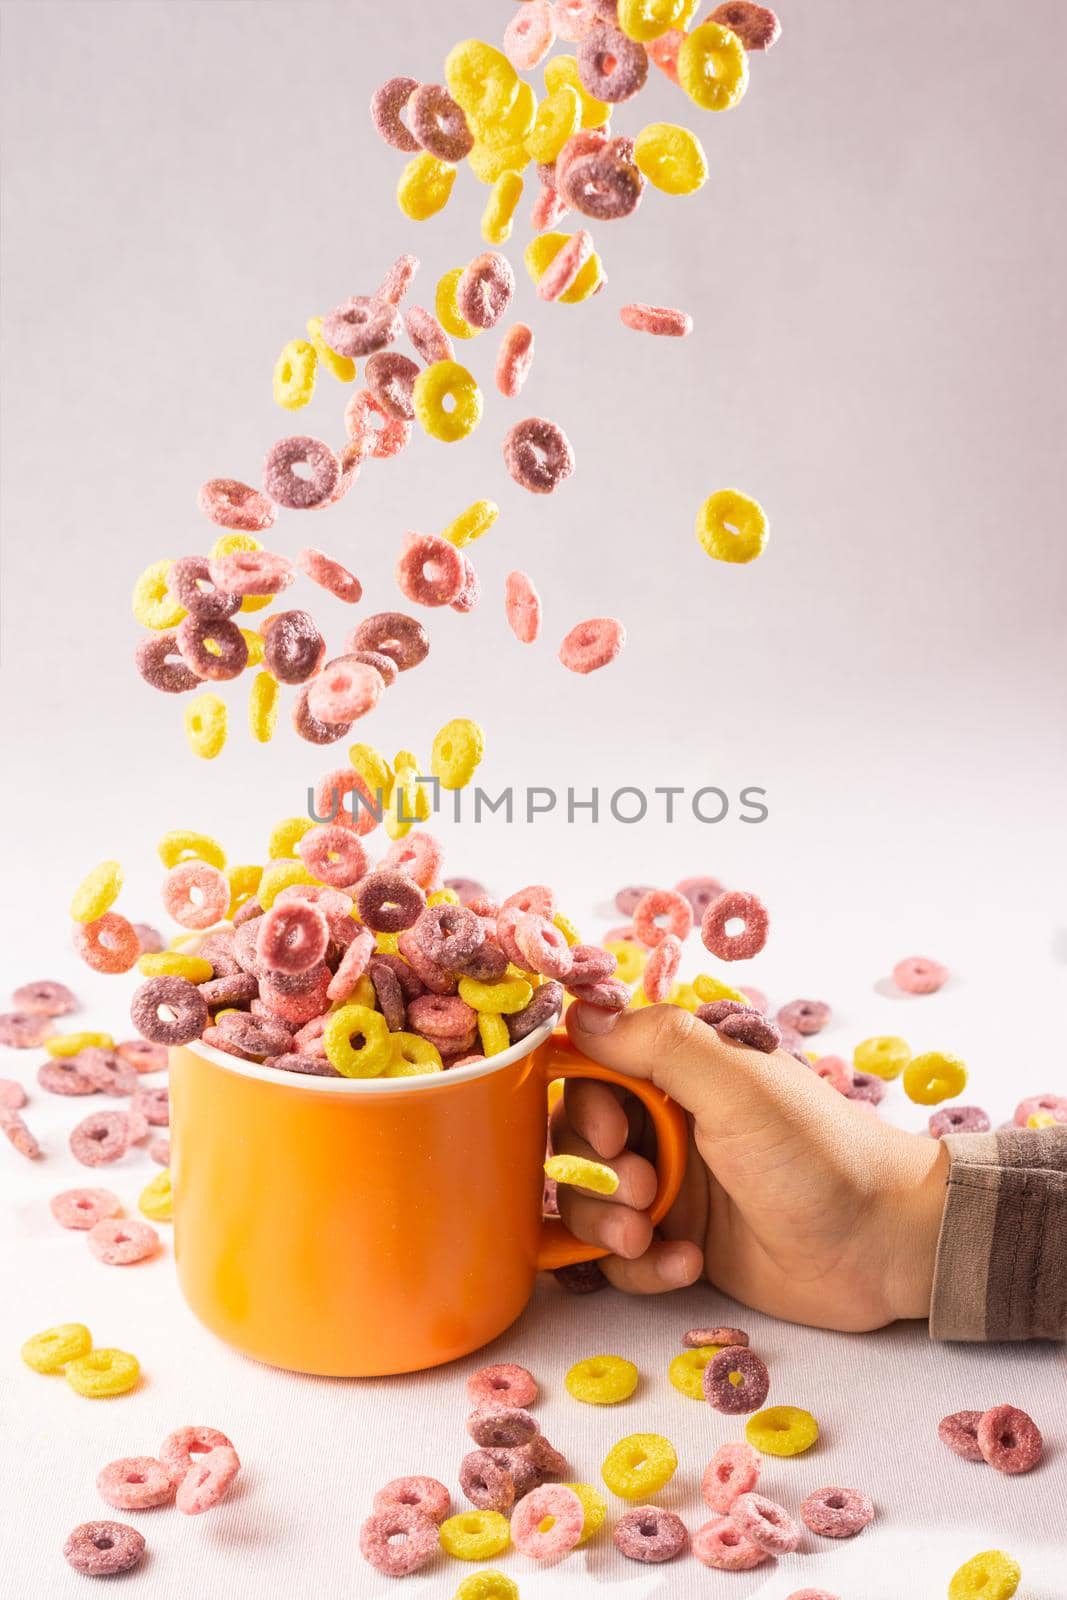 colored cereal rings falling into an orange cup held by a child's hand on white background with side lighting